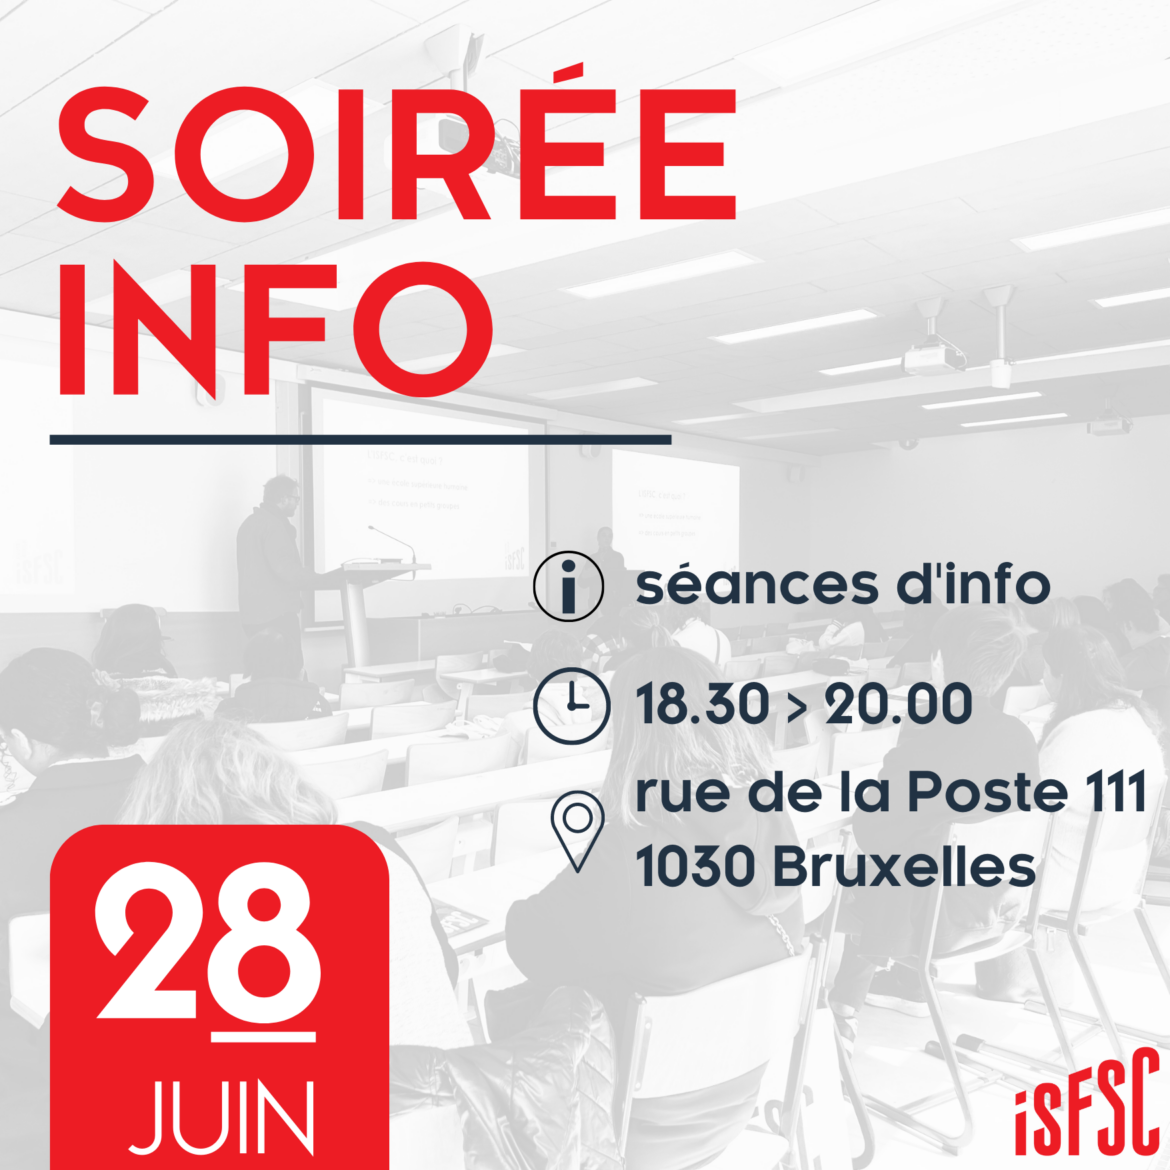 Soiree-info-28-06-23.png